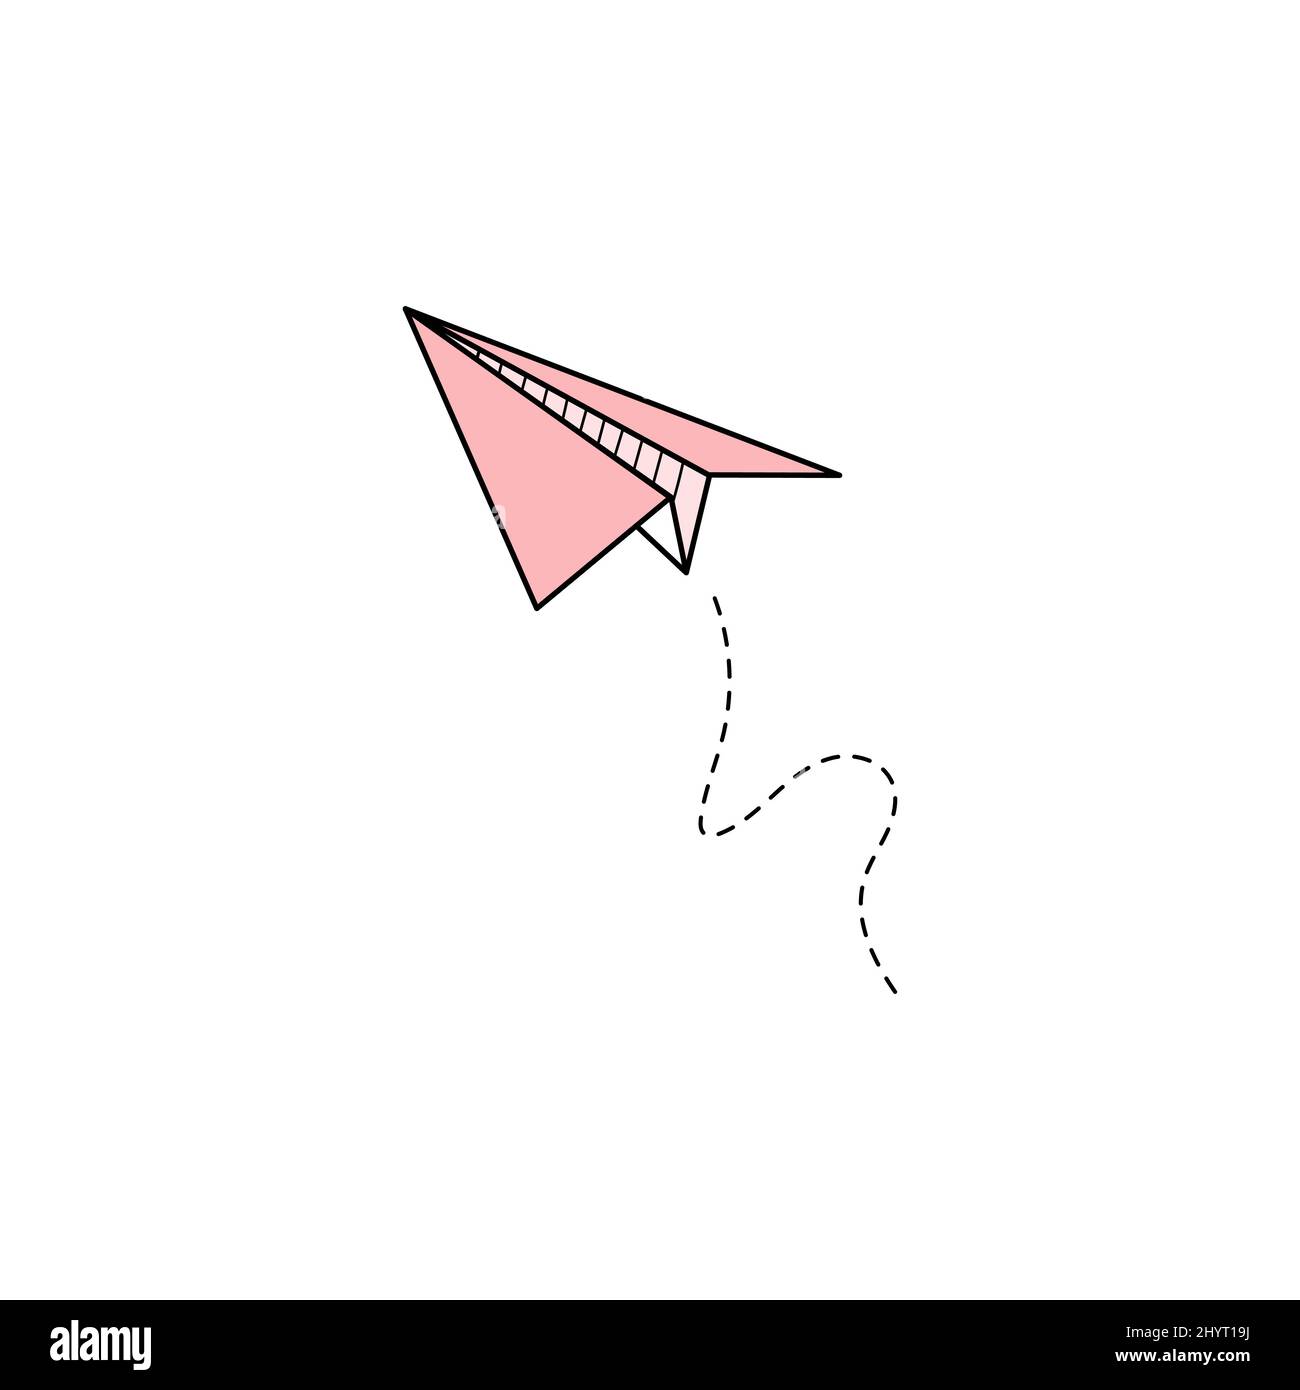 Doodle Paper Plane Drawing Graphic by GwensGraphicstudio · Creative Fabrica